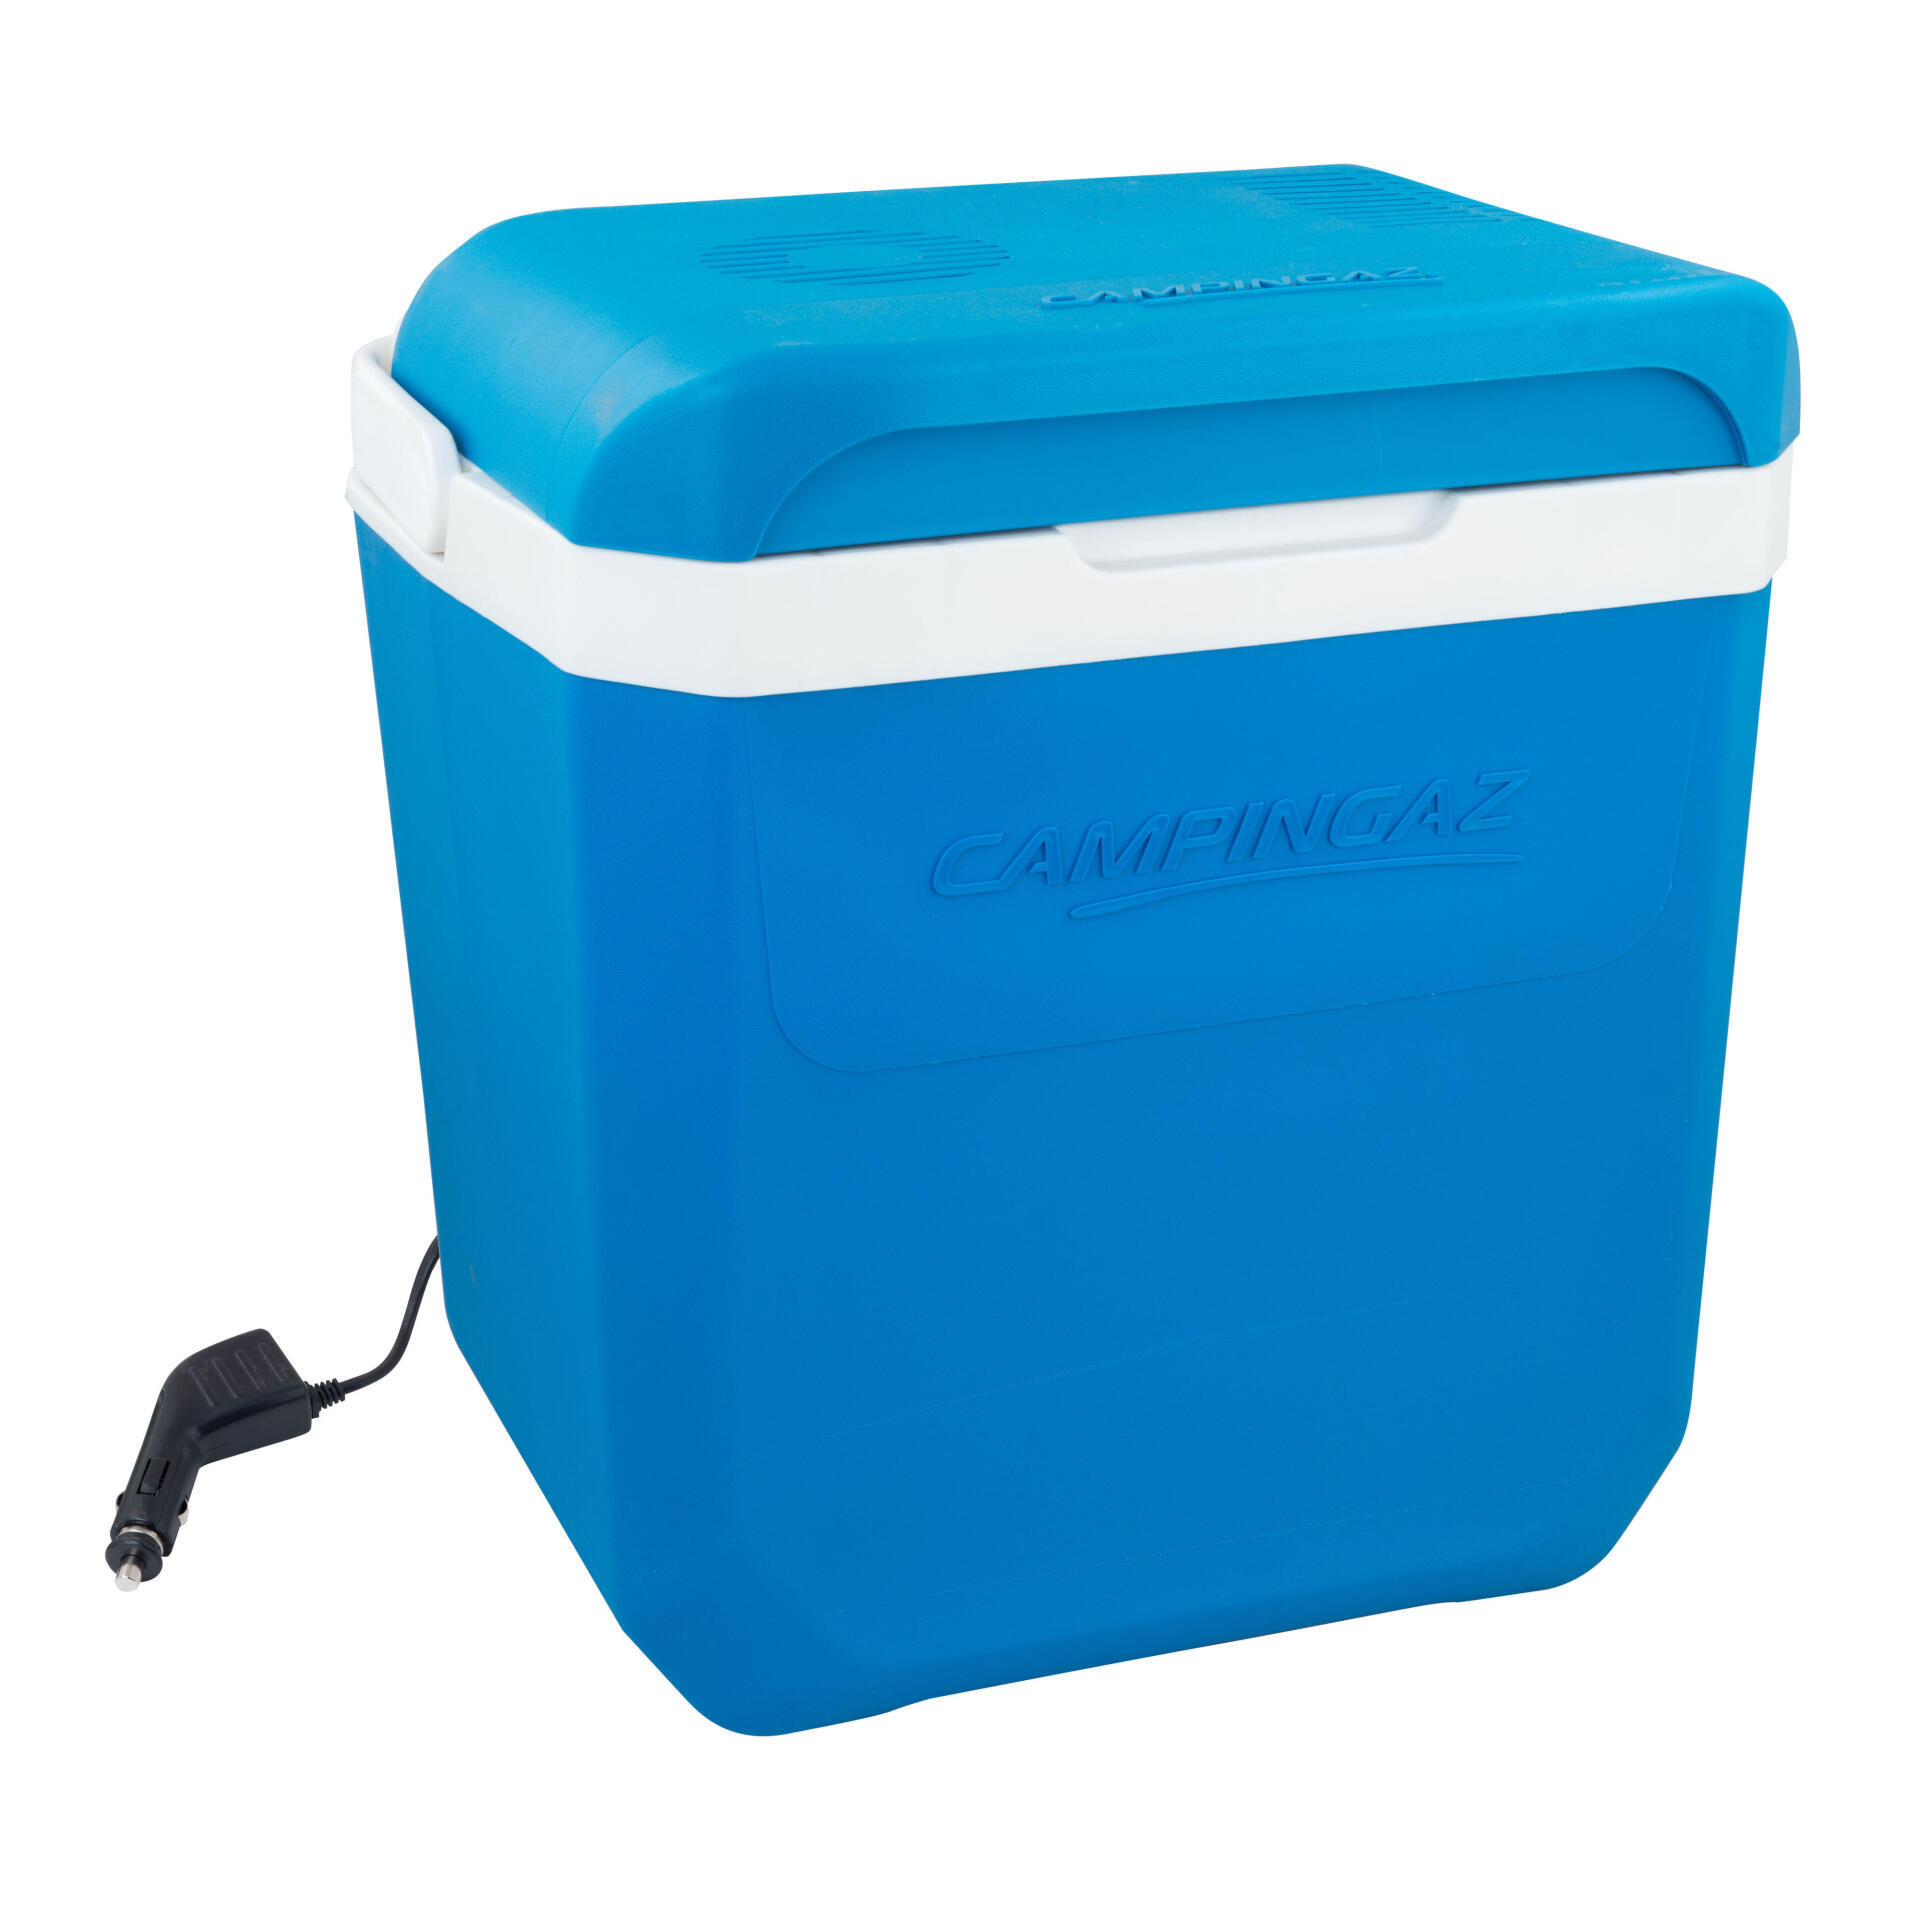 The electric cooler